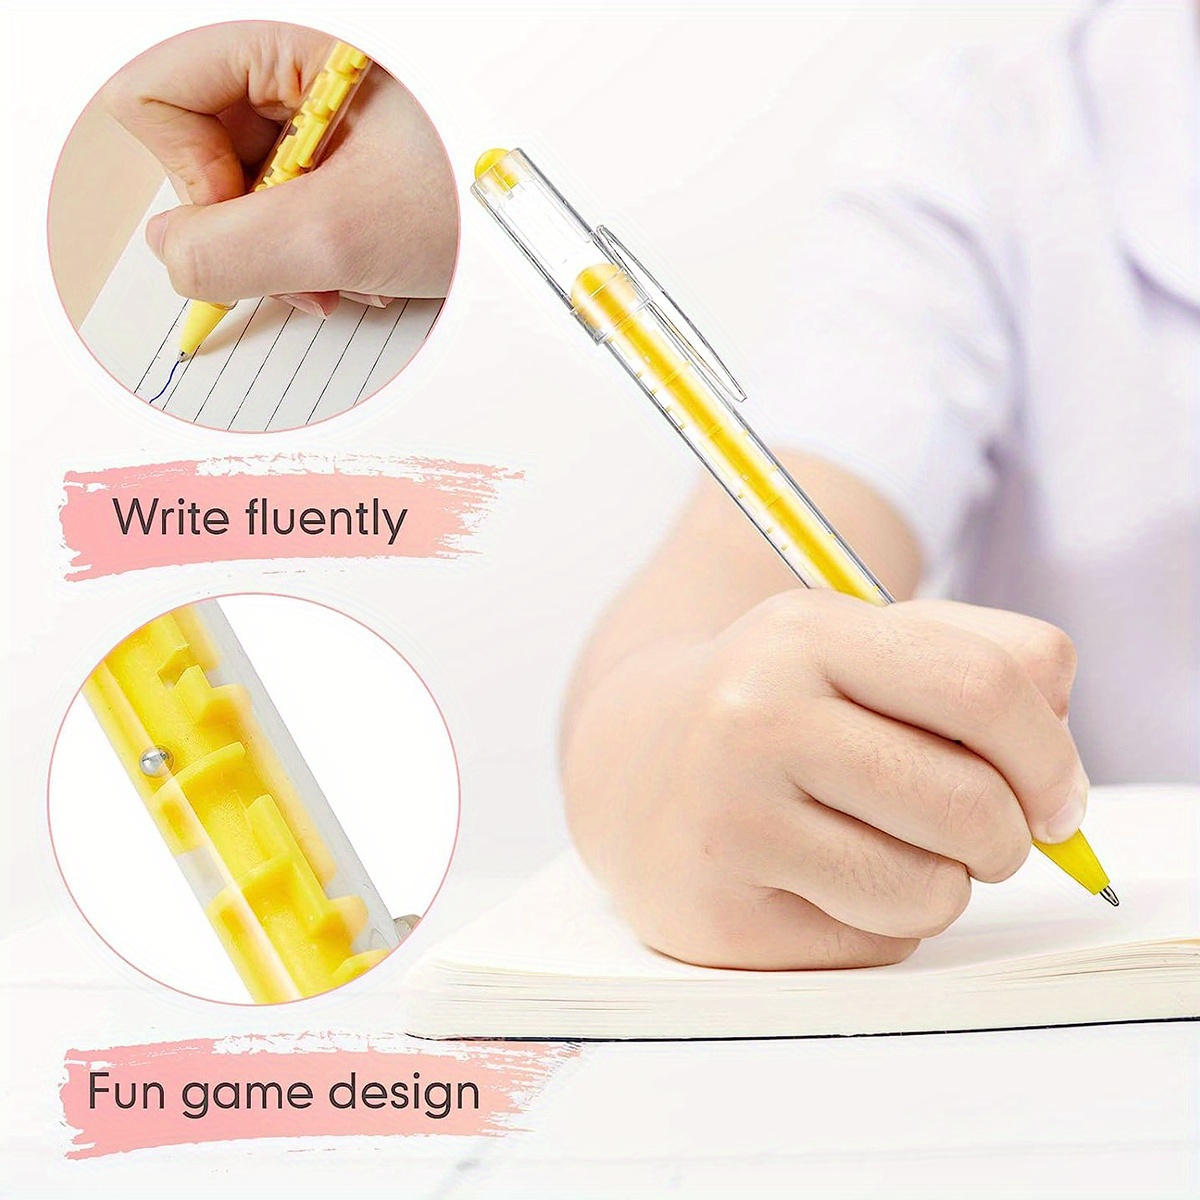 Gamie Maze Puzzle Novelty Pens for Kids and Adults - Pack of 12 - Pens with Built-in Ball Maze - Fidget Toy for Stress Relief - School and Office